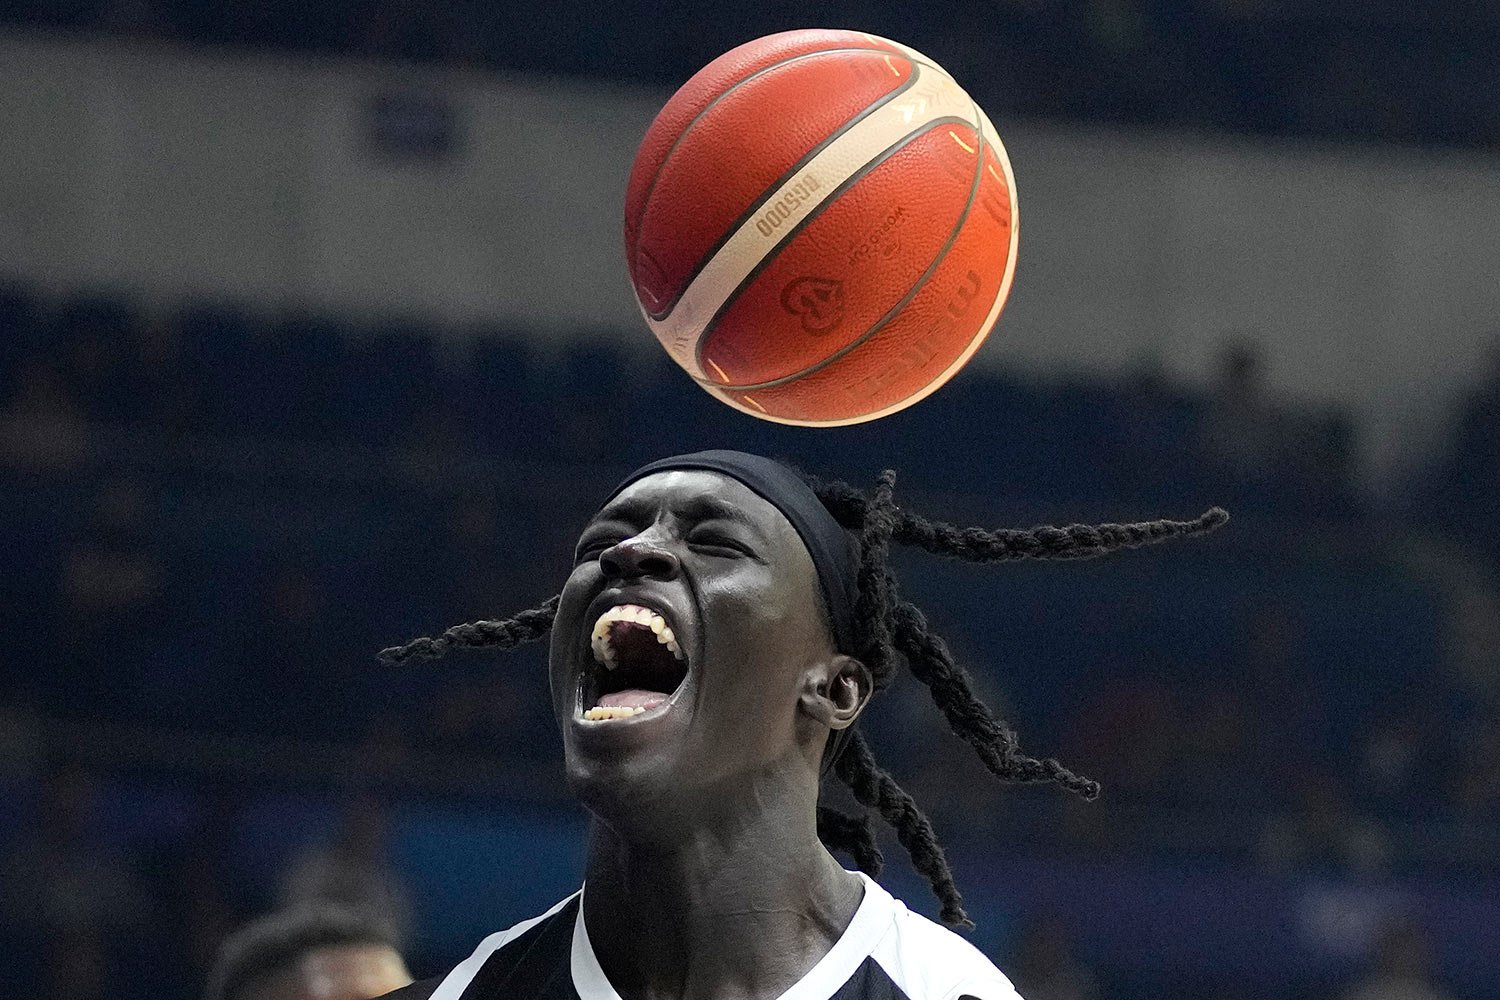  South Sudan center Deng Acuoth reacts after scoring against Angola during their Basketball World Cup classification match at the Araneta Coliseum in Manila, Philippines on Saturday Sept. 2, 2023. (AP Photo/Aaron Favila) 